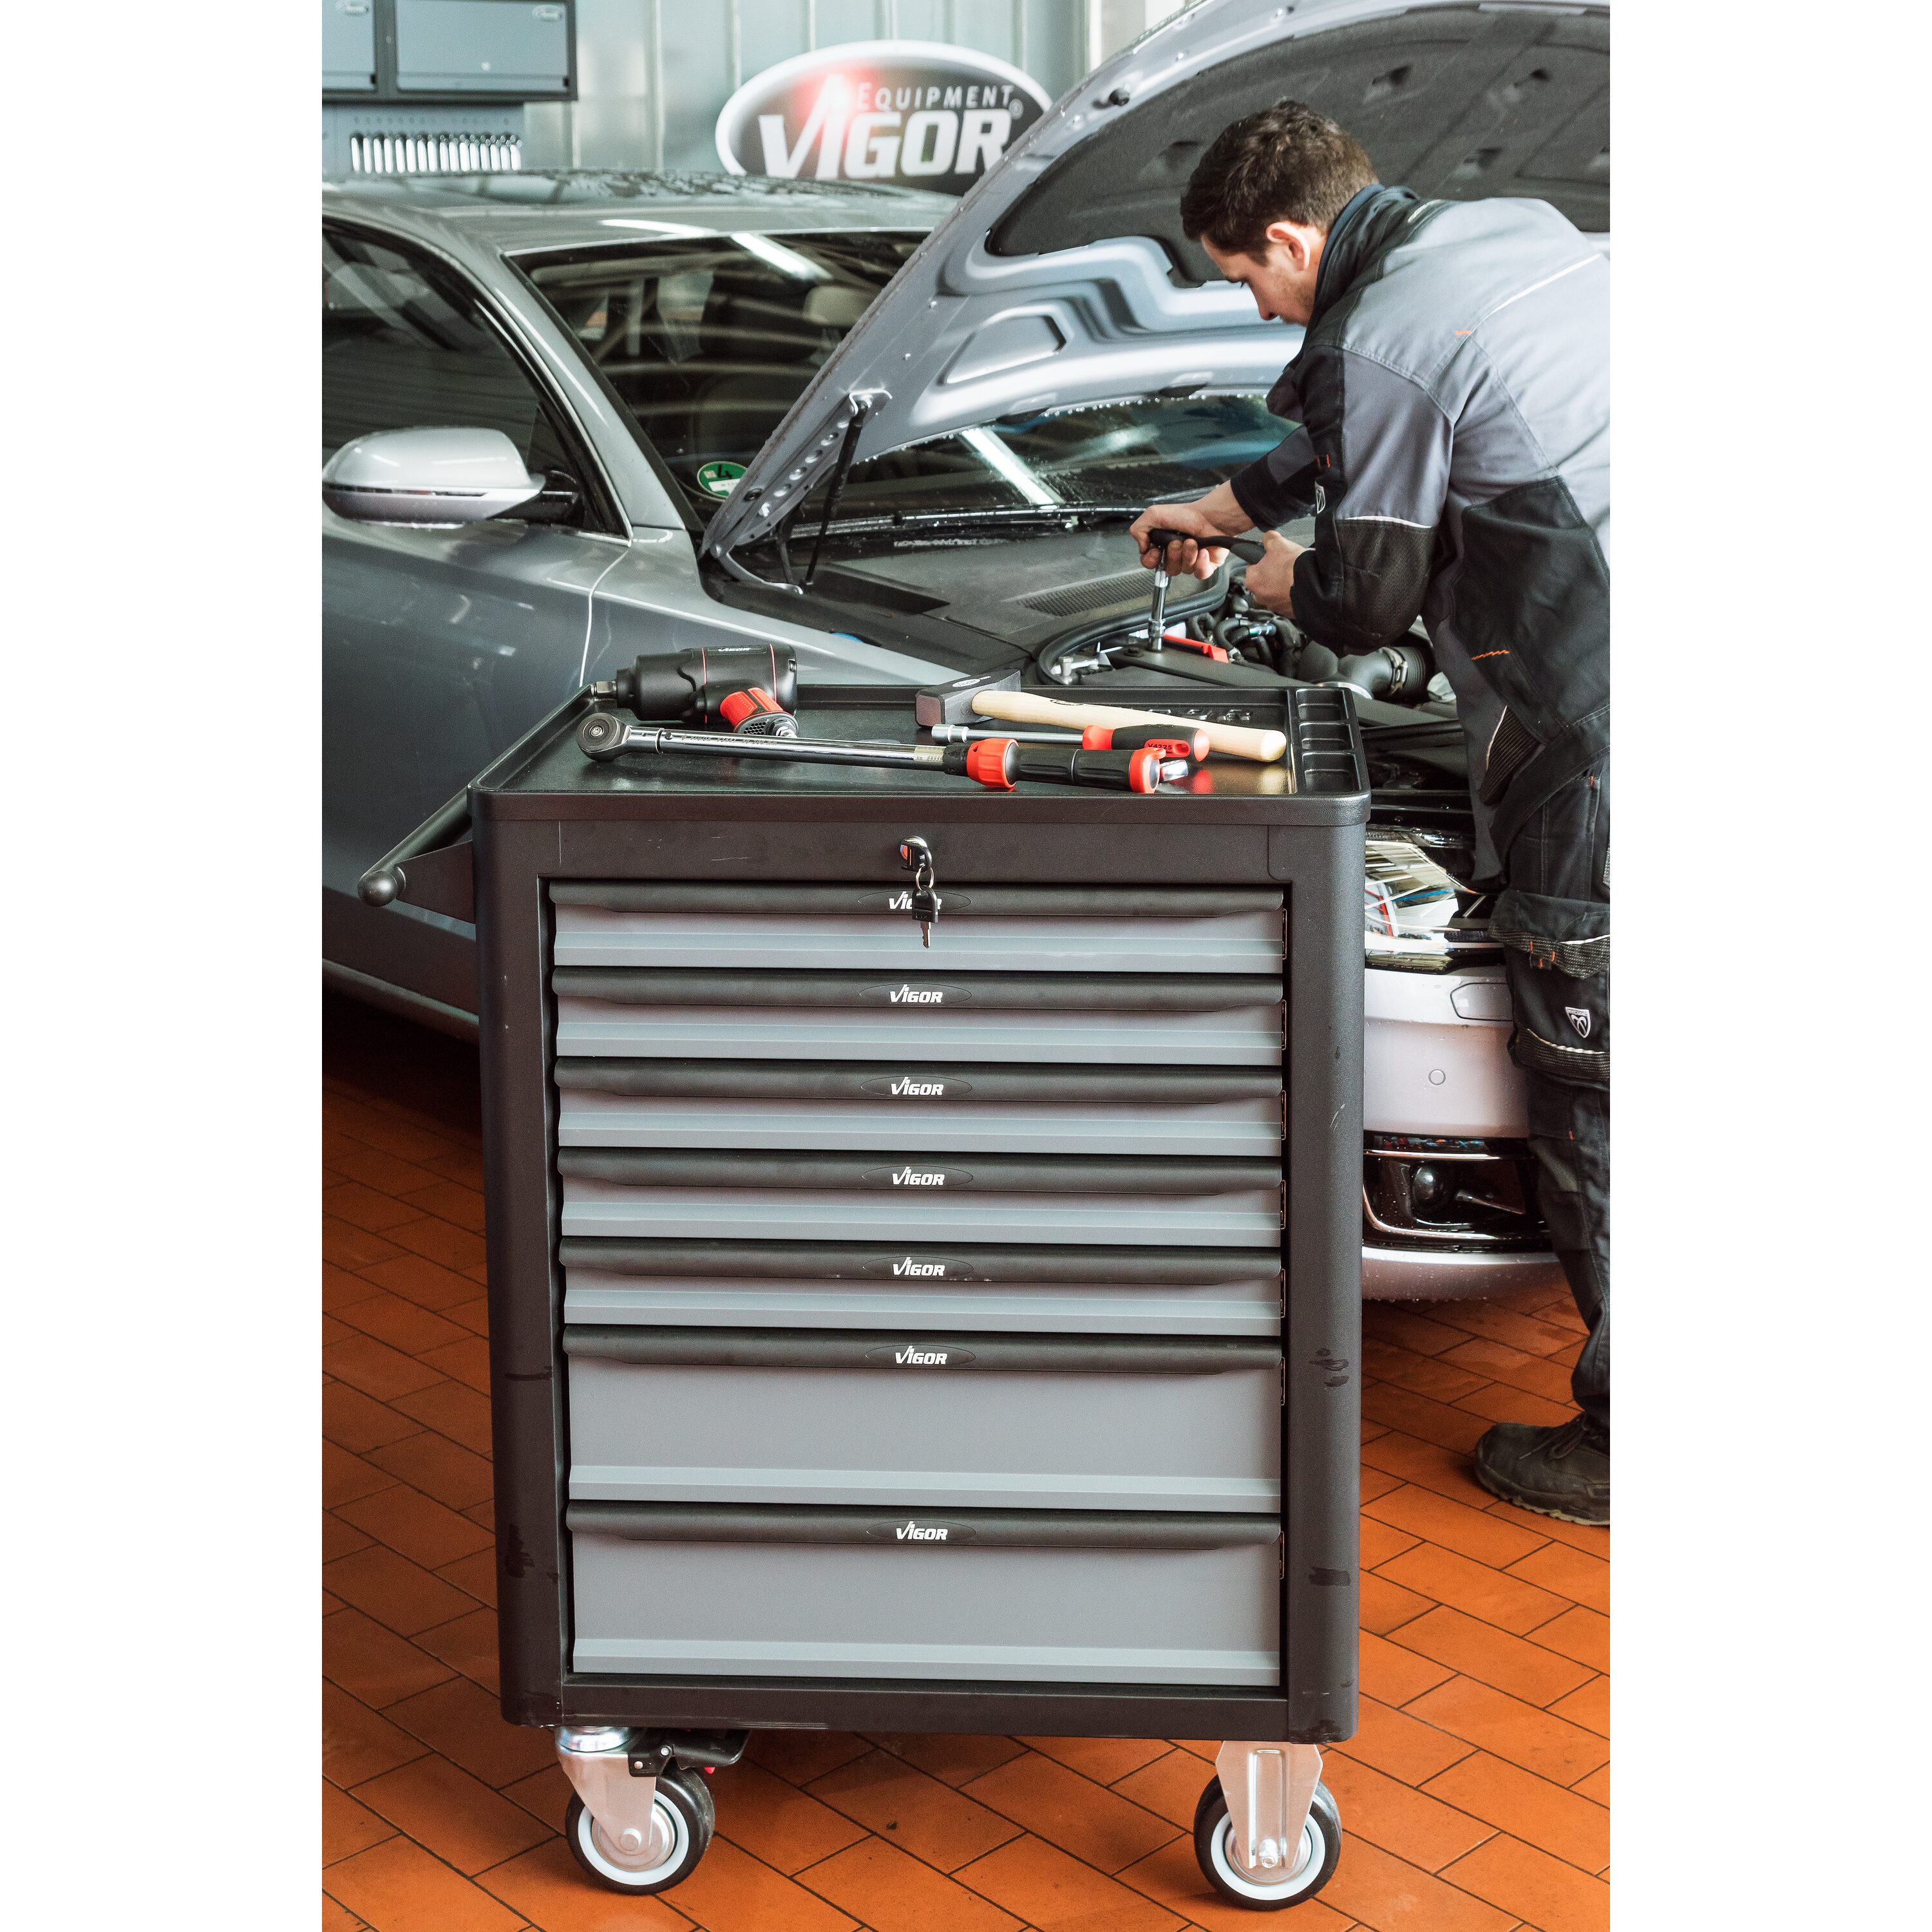 Tool trolley Sortiment | product worlds with assortment Tool / mit | | Series | Trolleys trolleys ∙ Equipment VIGOR assortment with Werkstattwagen | Equipment Factory L Tool